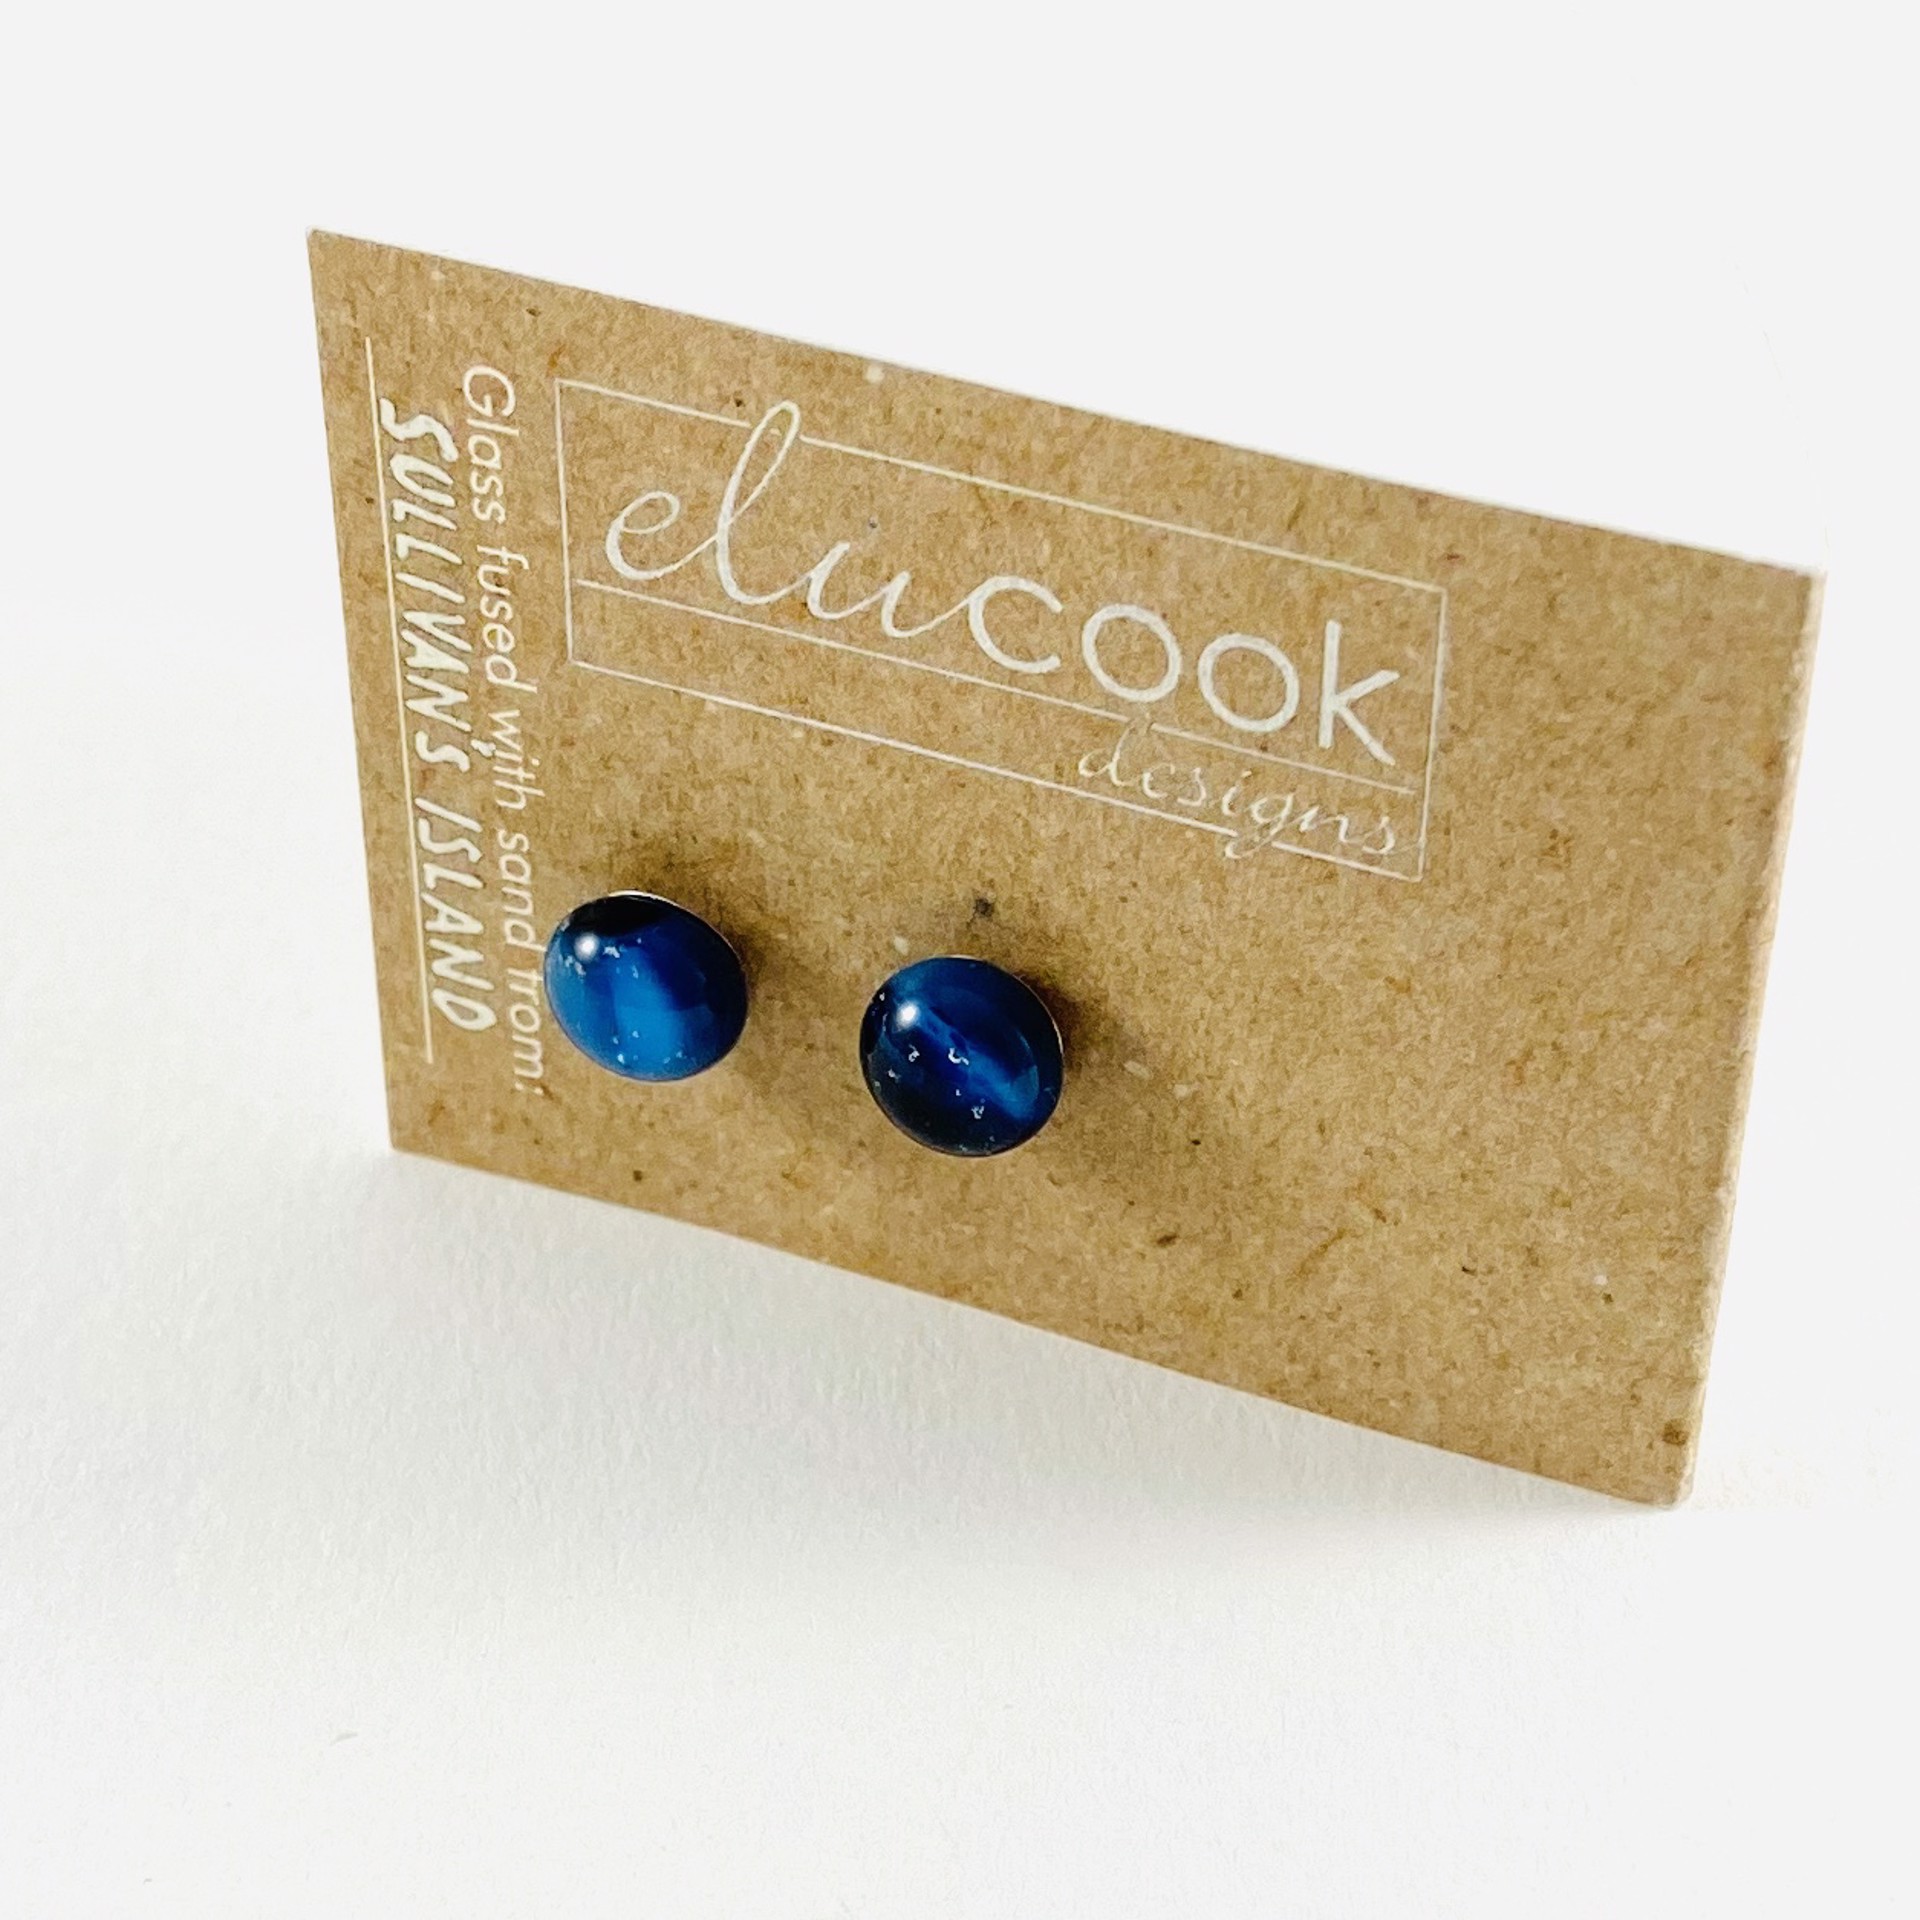 Button Earrings, 8j by Emily Cook